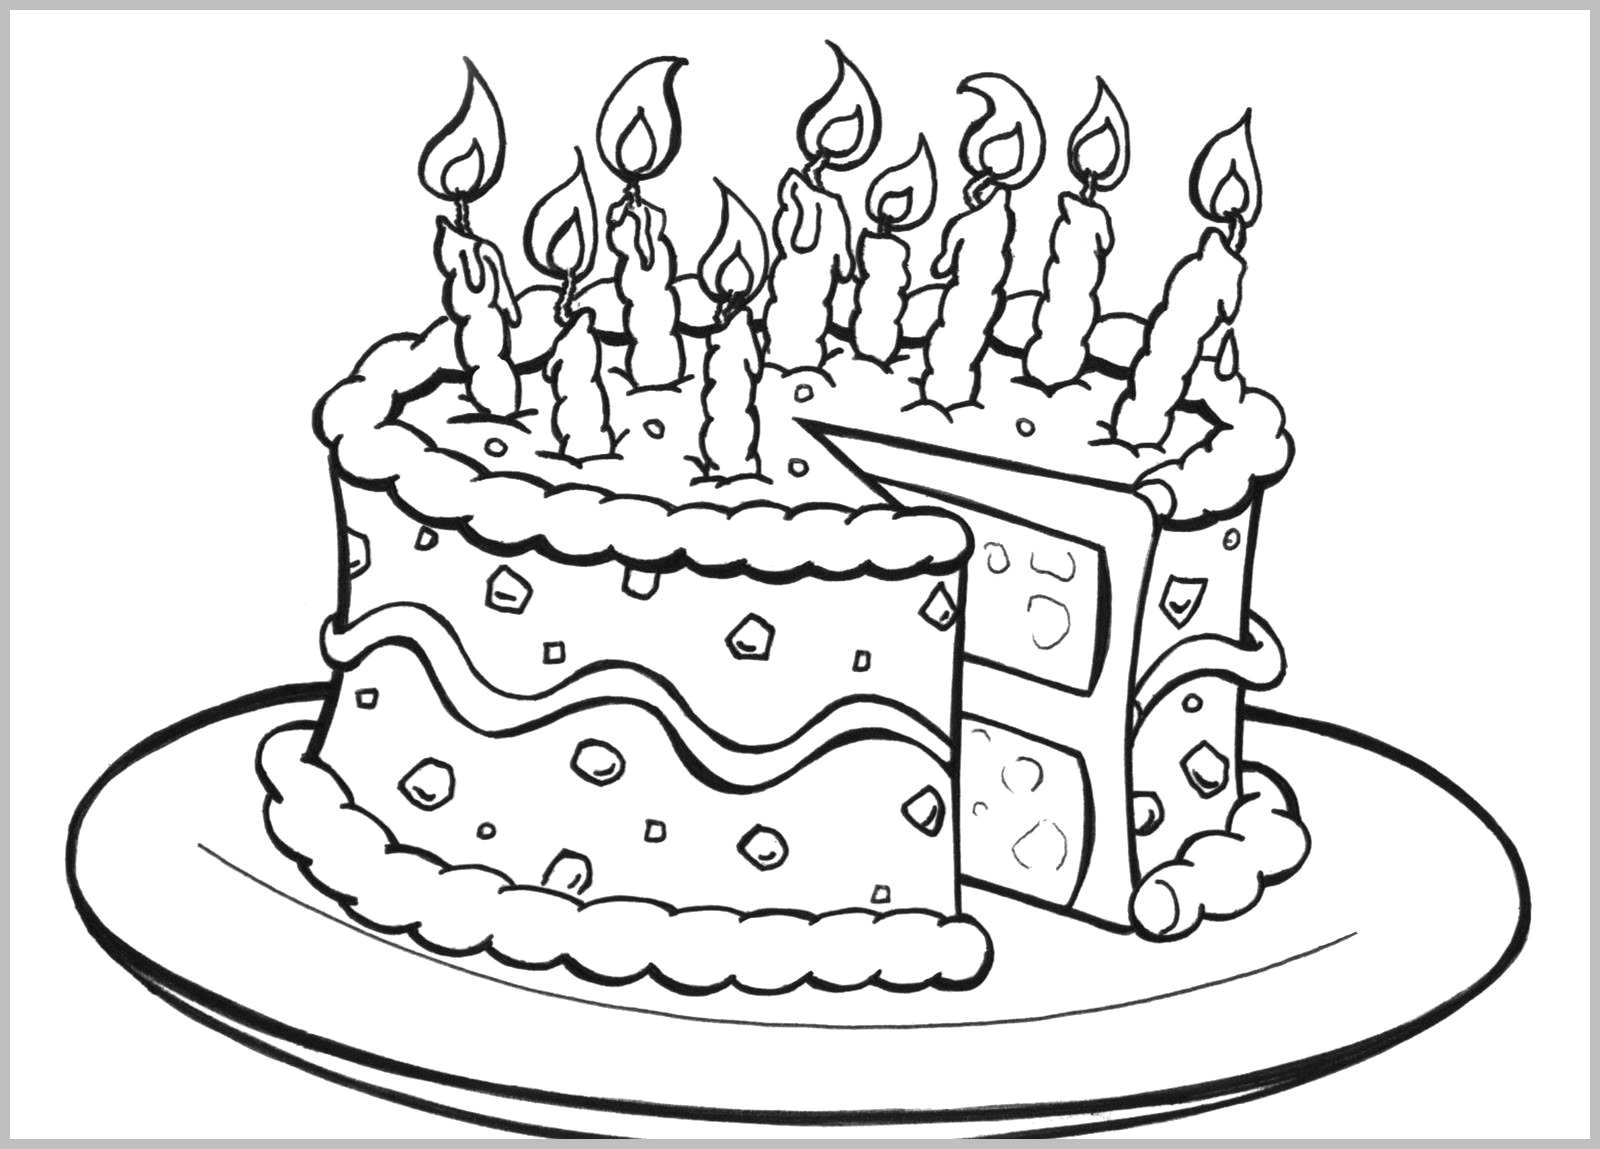 Free Printable Birthday Cake Coloring Pages For Kids Cool2Bkids - Free Printable Birthday Cake